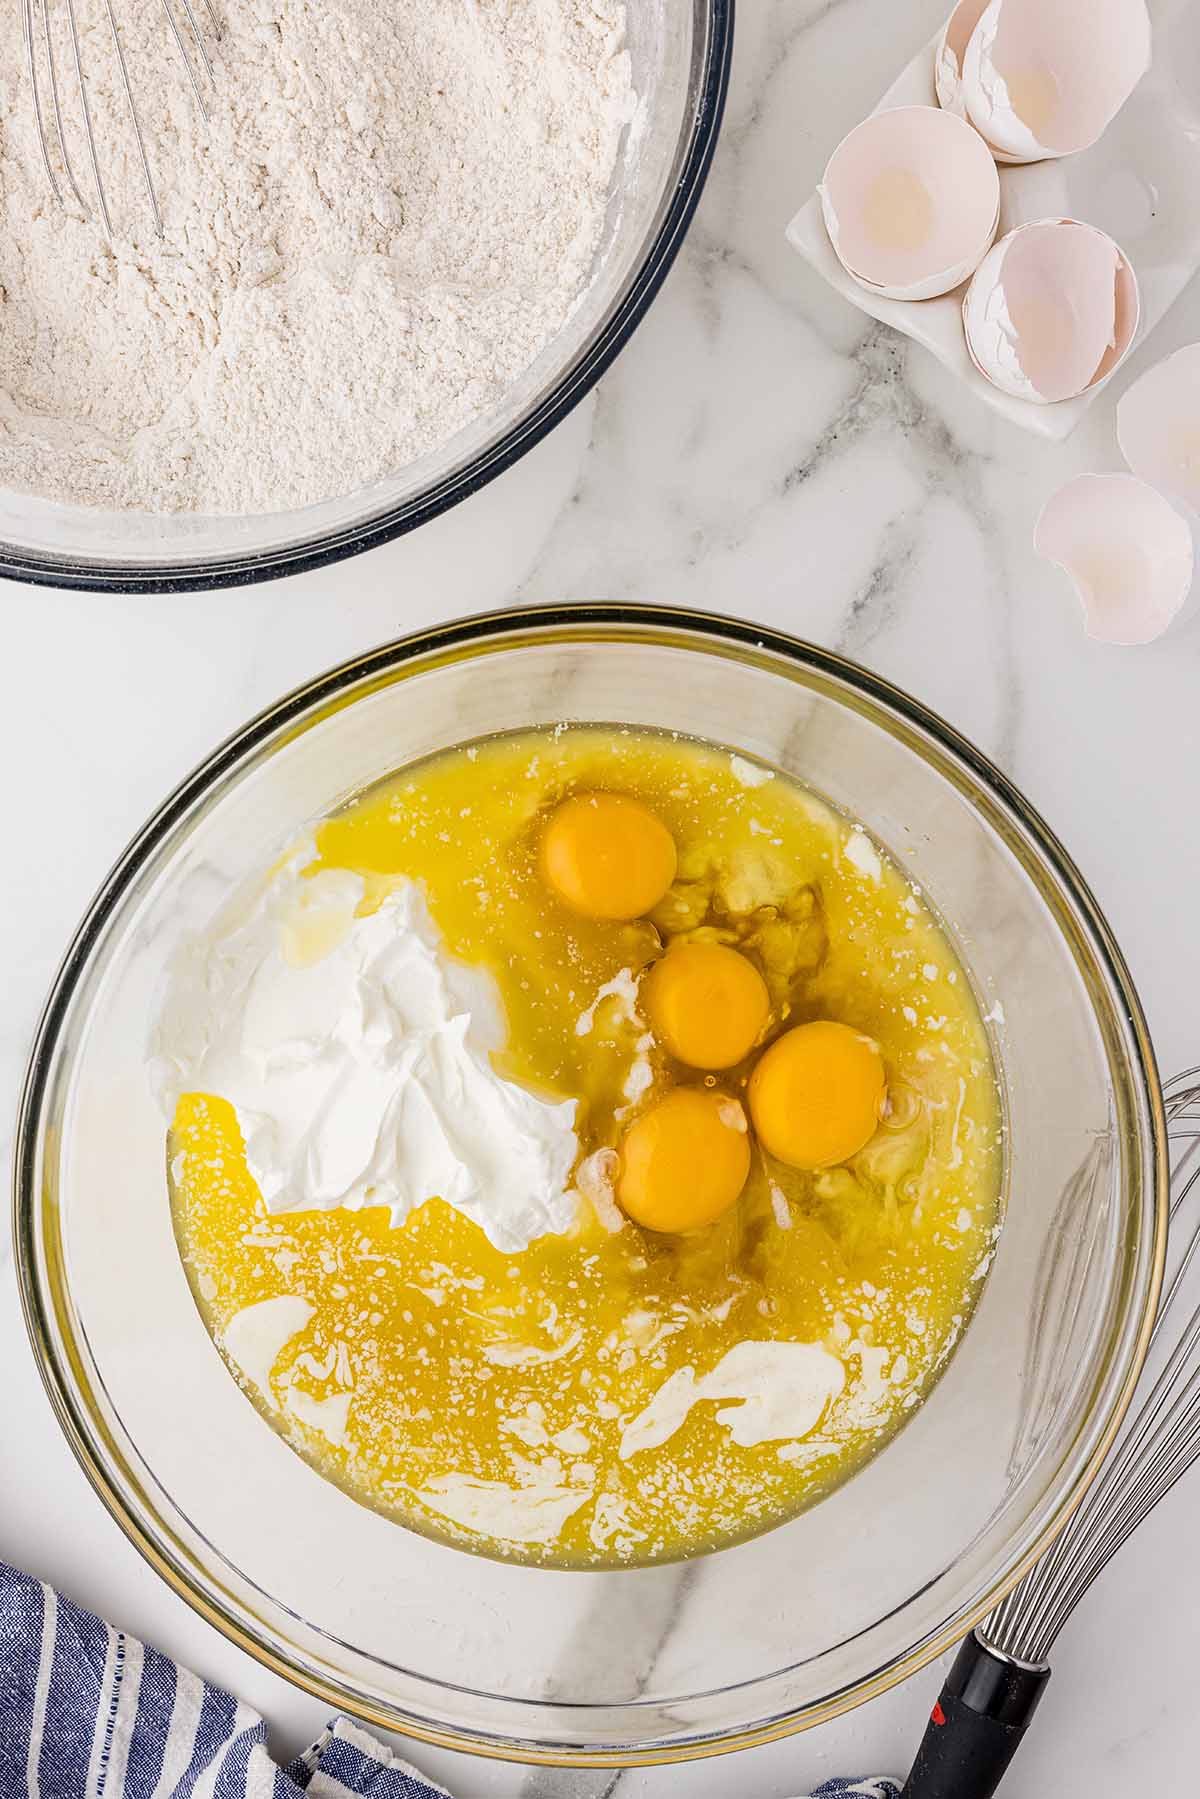 Eggs and sugar in a bowl.